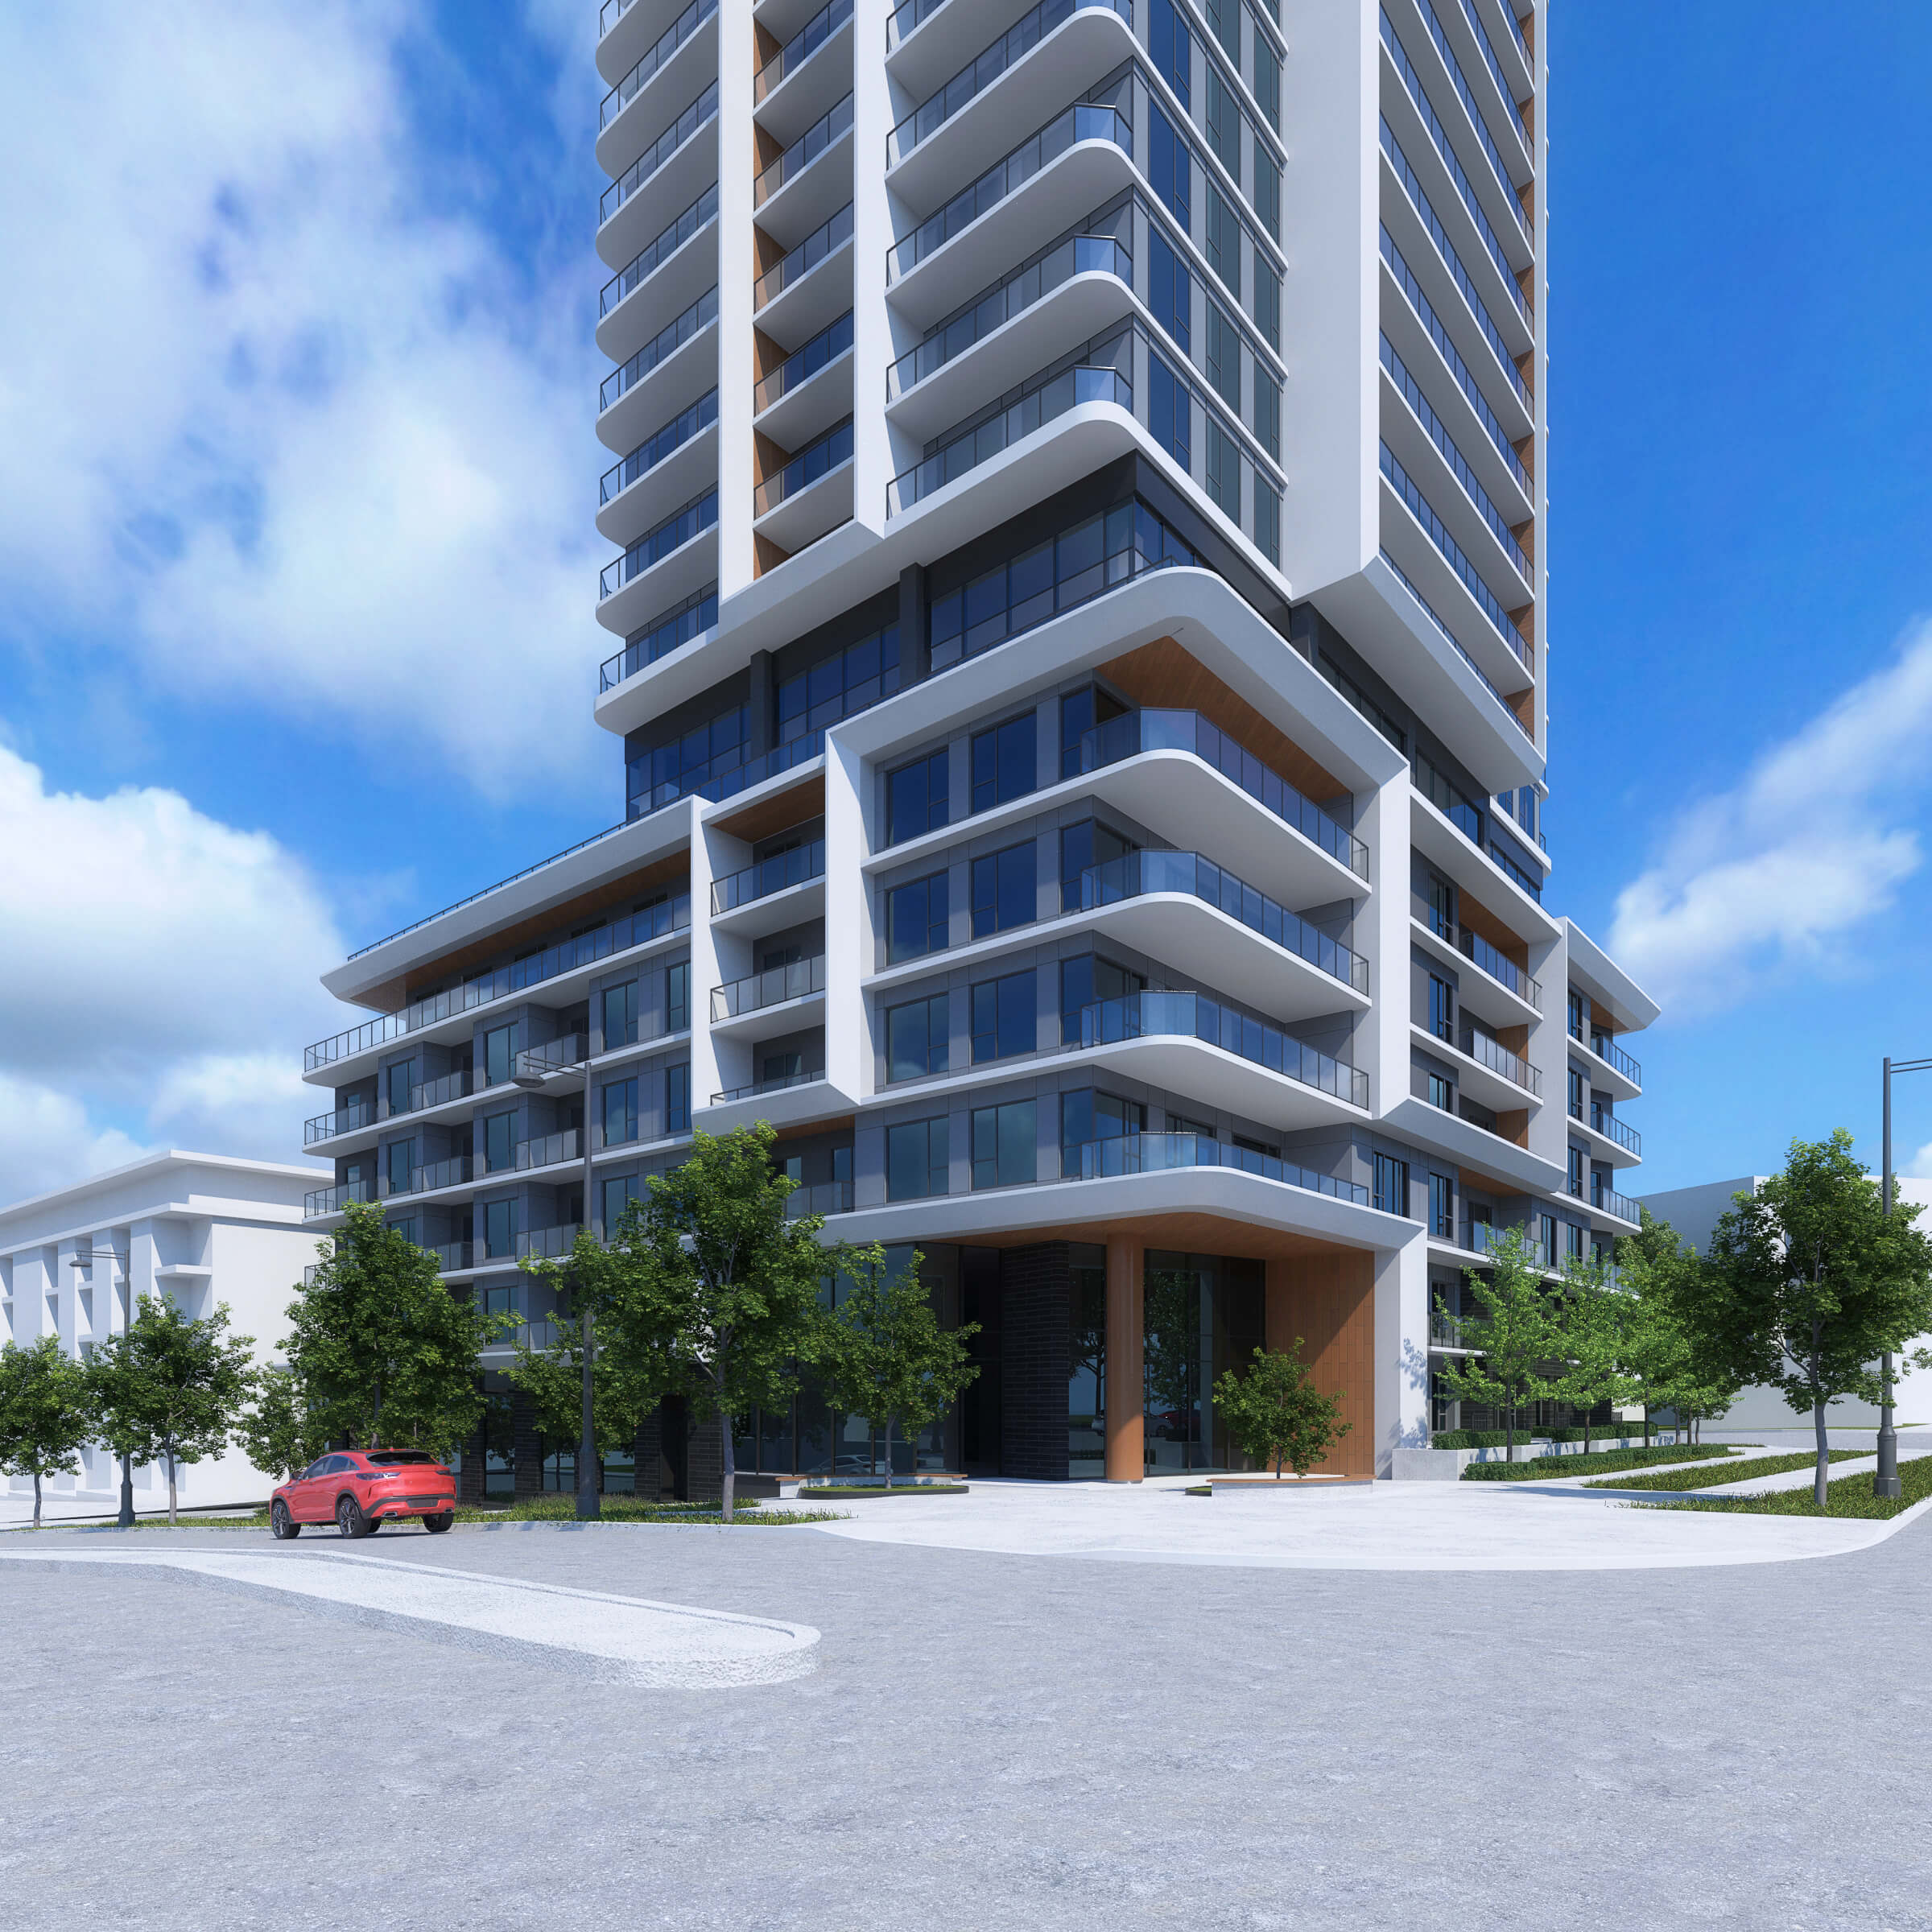 The ‘Laurel Drive” development is a mixed-use, 28-storey high-rise project in Surrey. Design by Group 161 | DF Architecture.